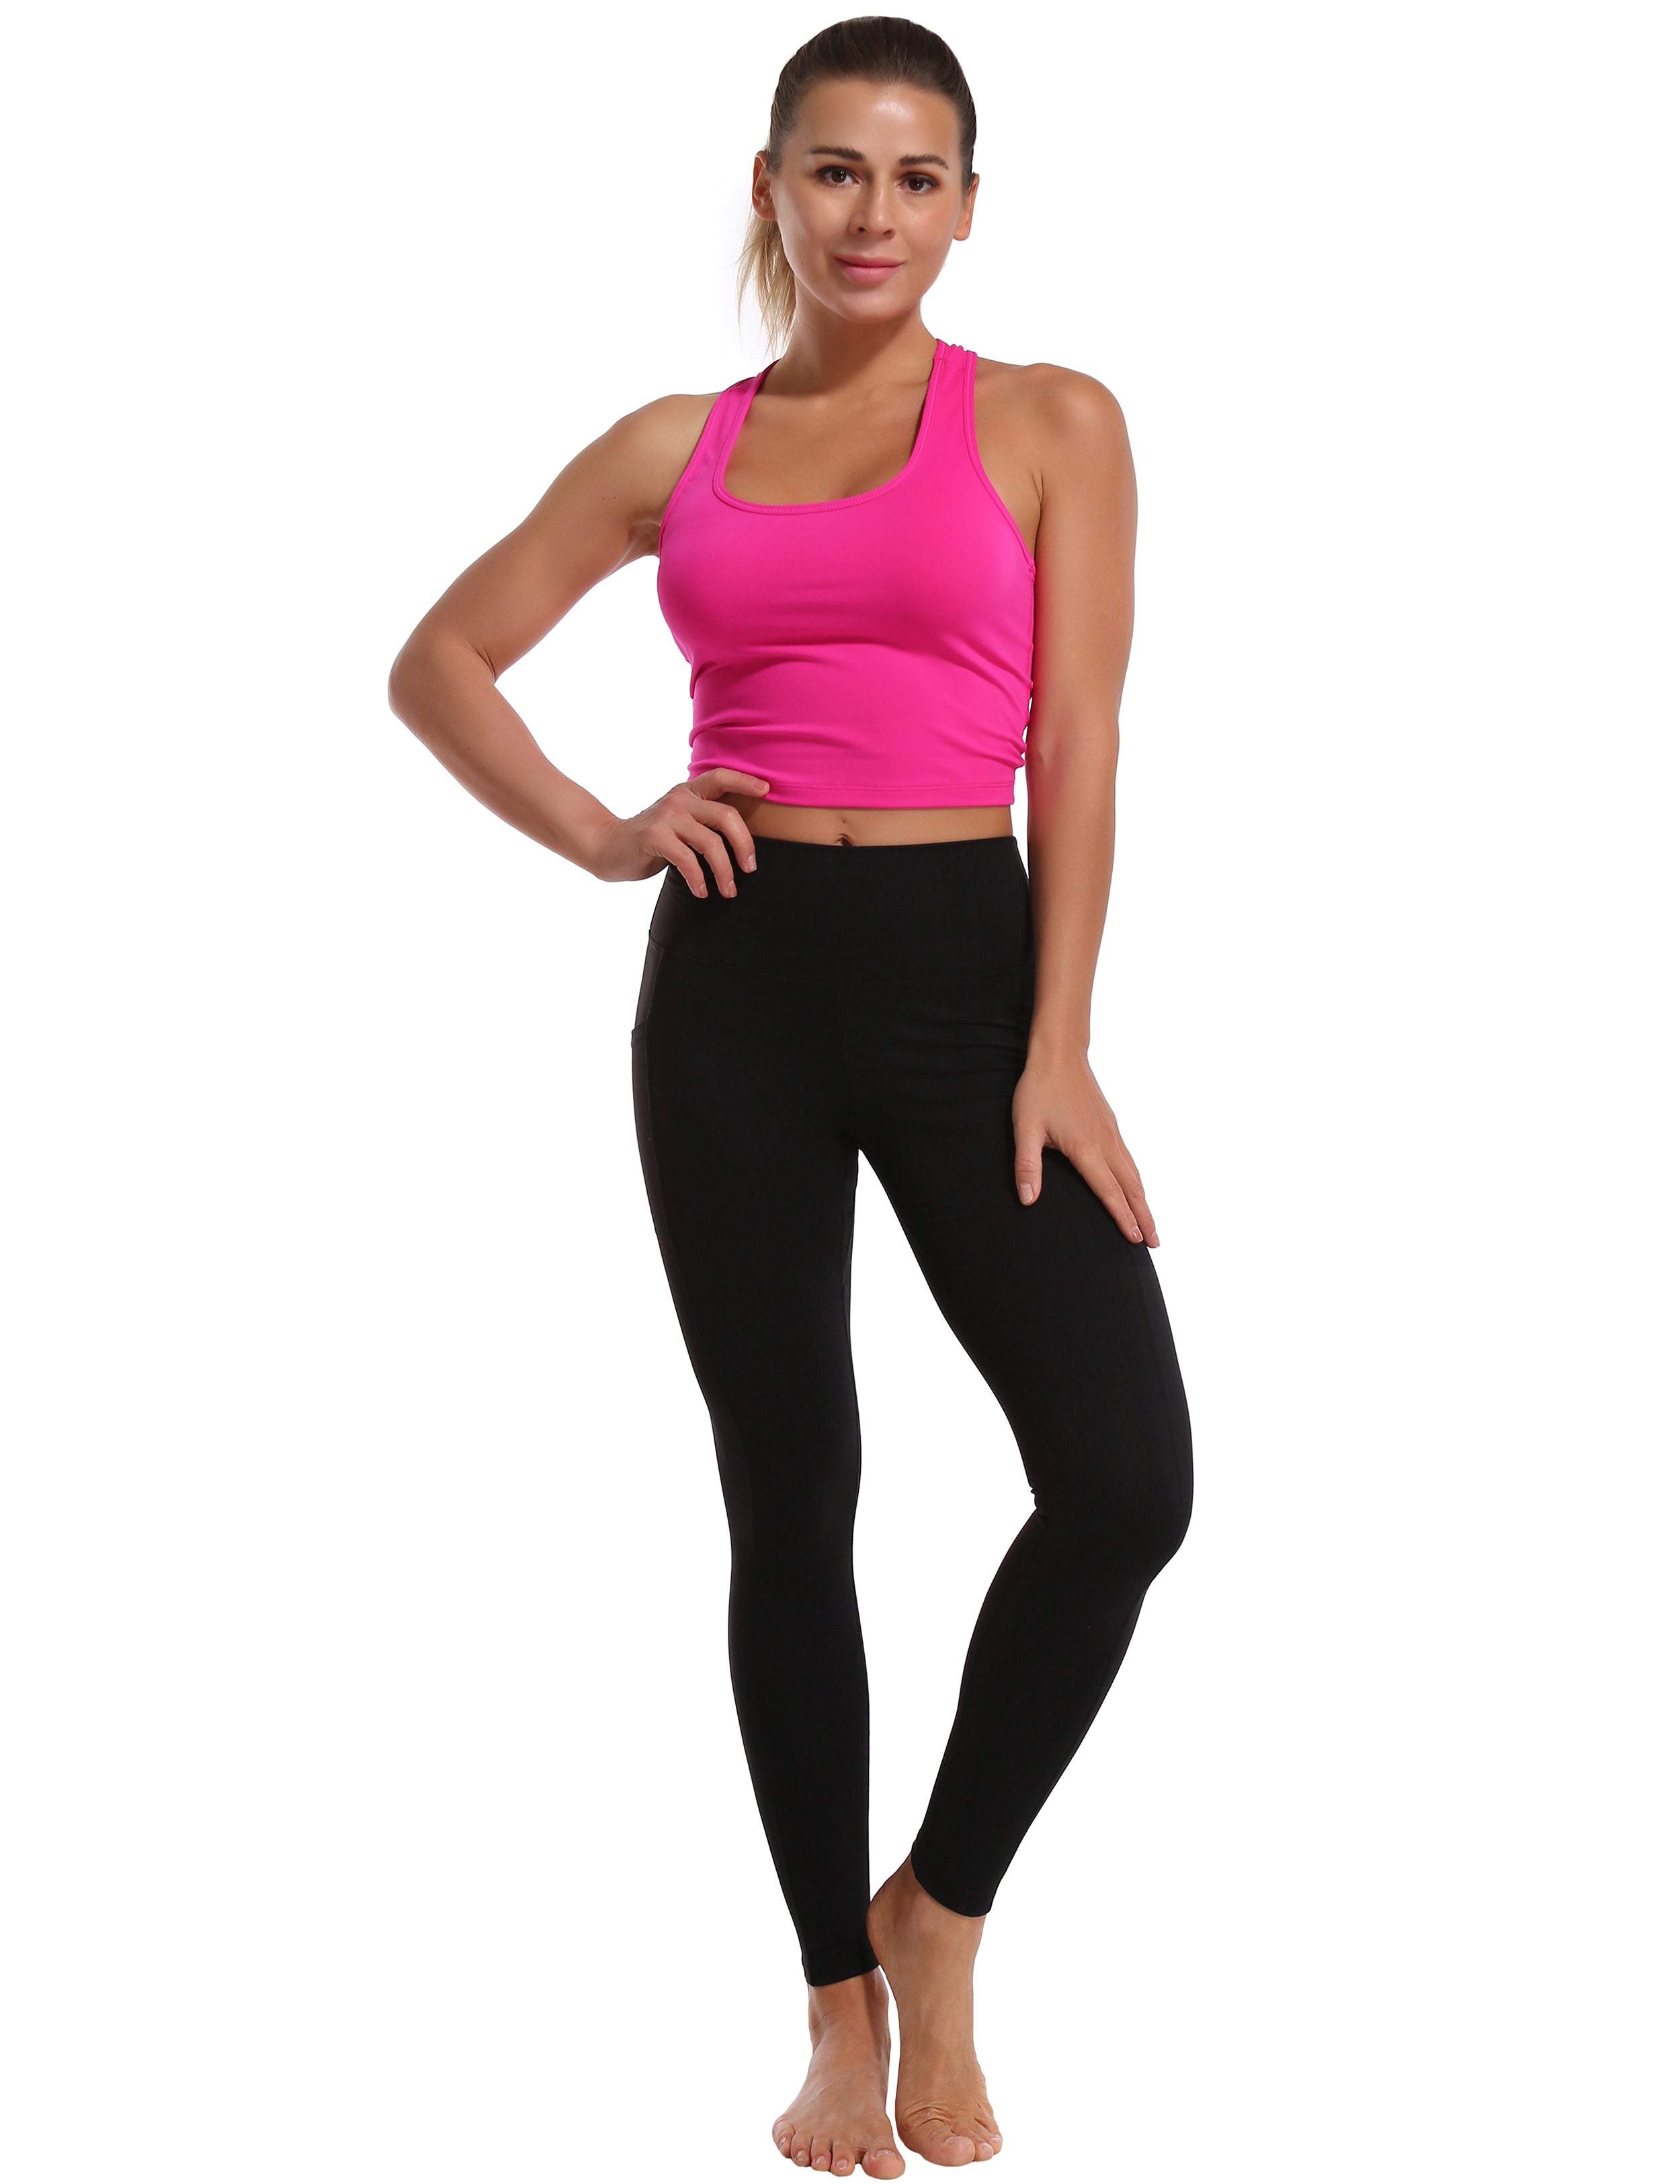 High Waisted Plus Size Pants 7/8 Length Leggings with Pockets black_Plus Size